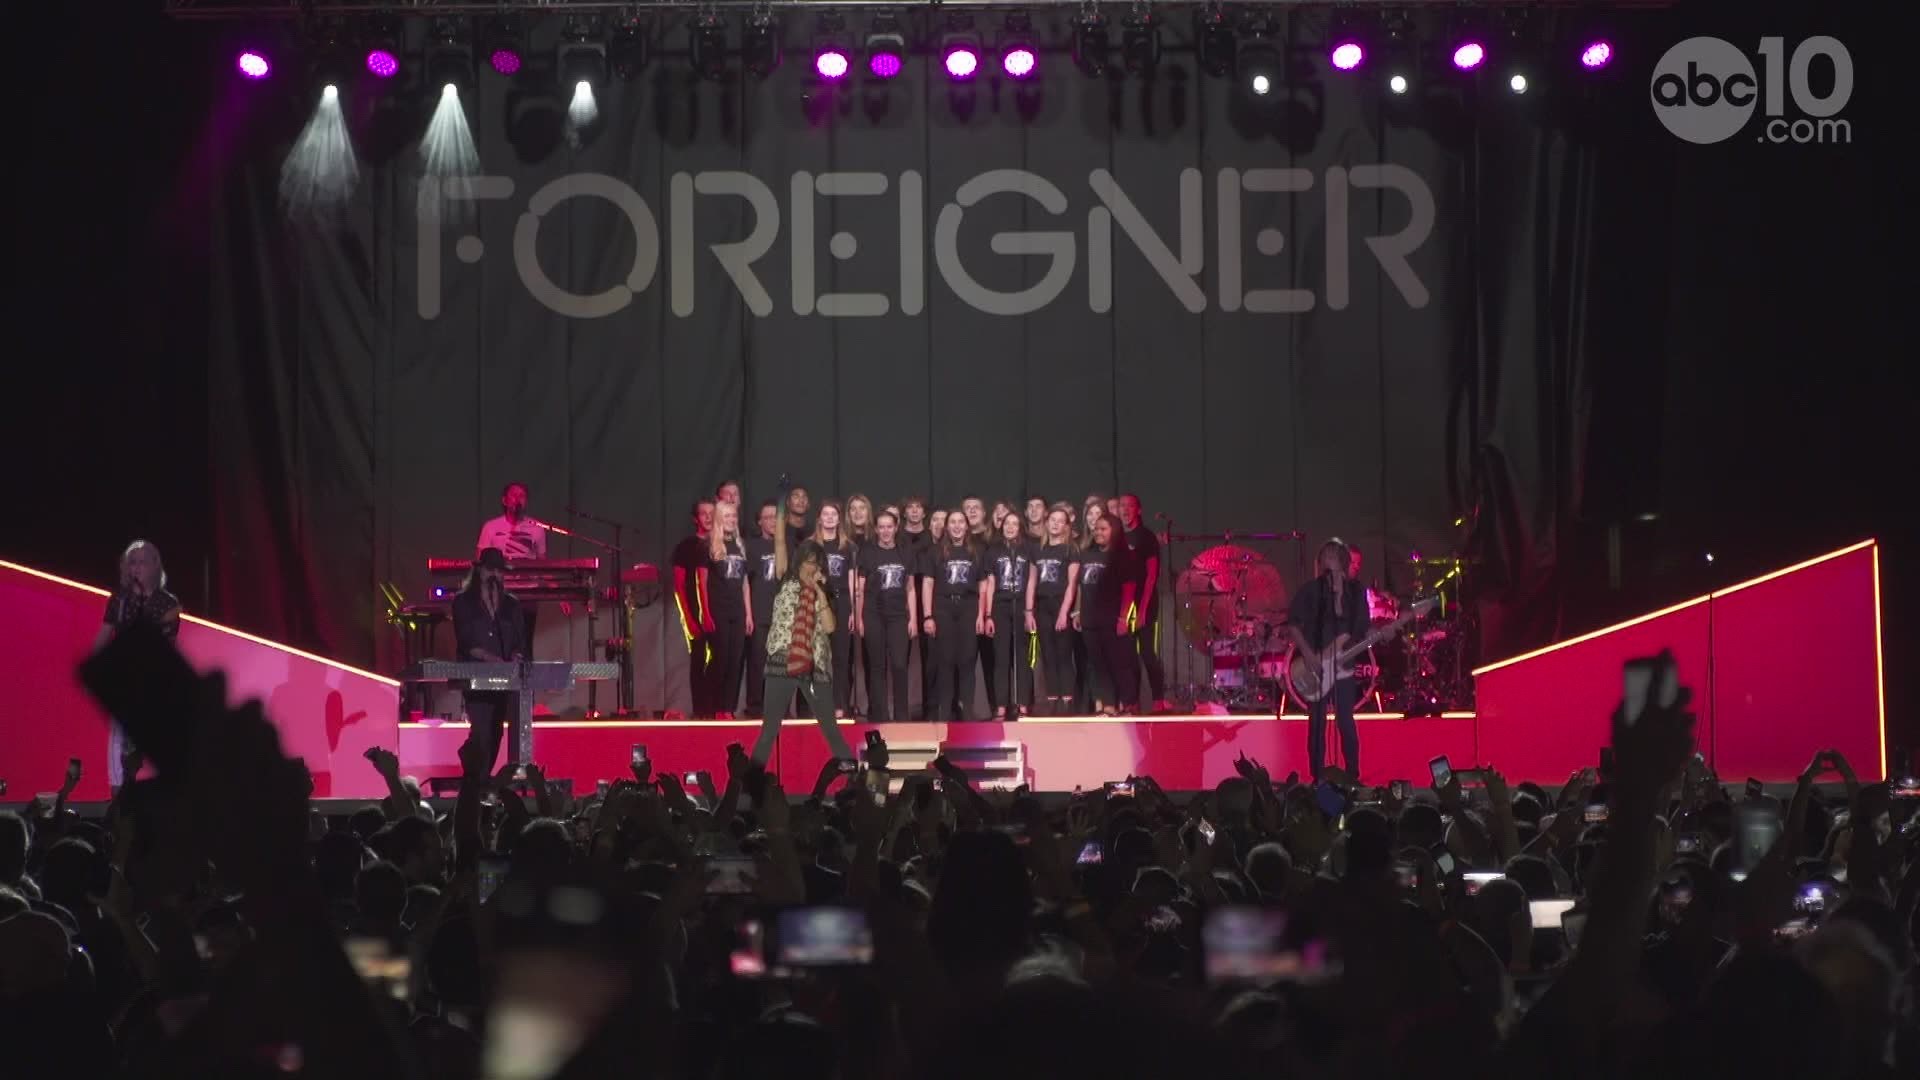 Friday night, the Rocklin High School Choir joined the rock band “Foreigner” on stage to sing their hit song "I Want to Know What Love Is" at Thunder Valley Casino. The performance was part of the band’s charity partnership with the Grammy Foundation to restore music education in U.S. schools.